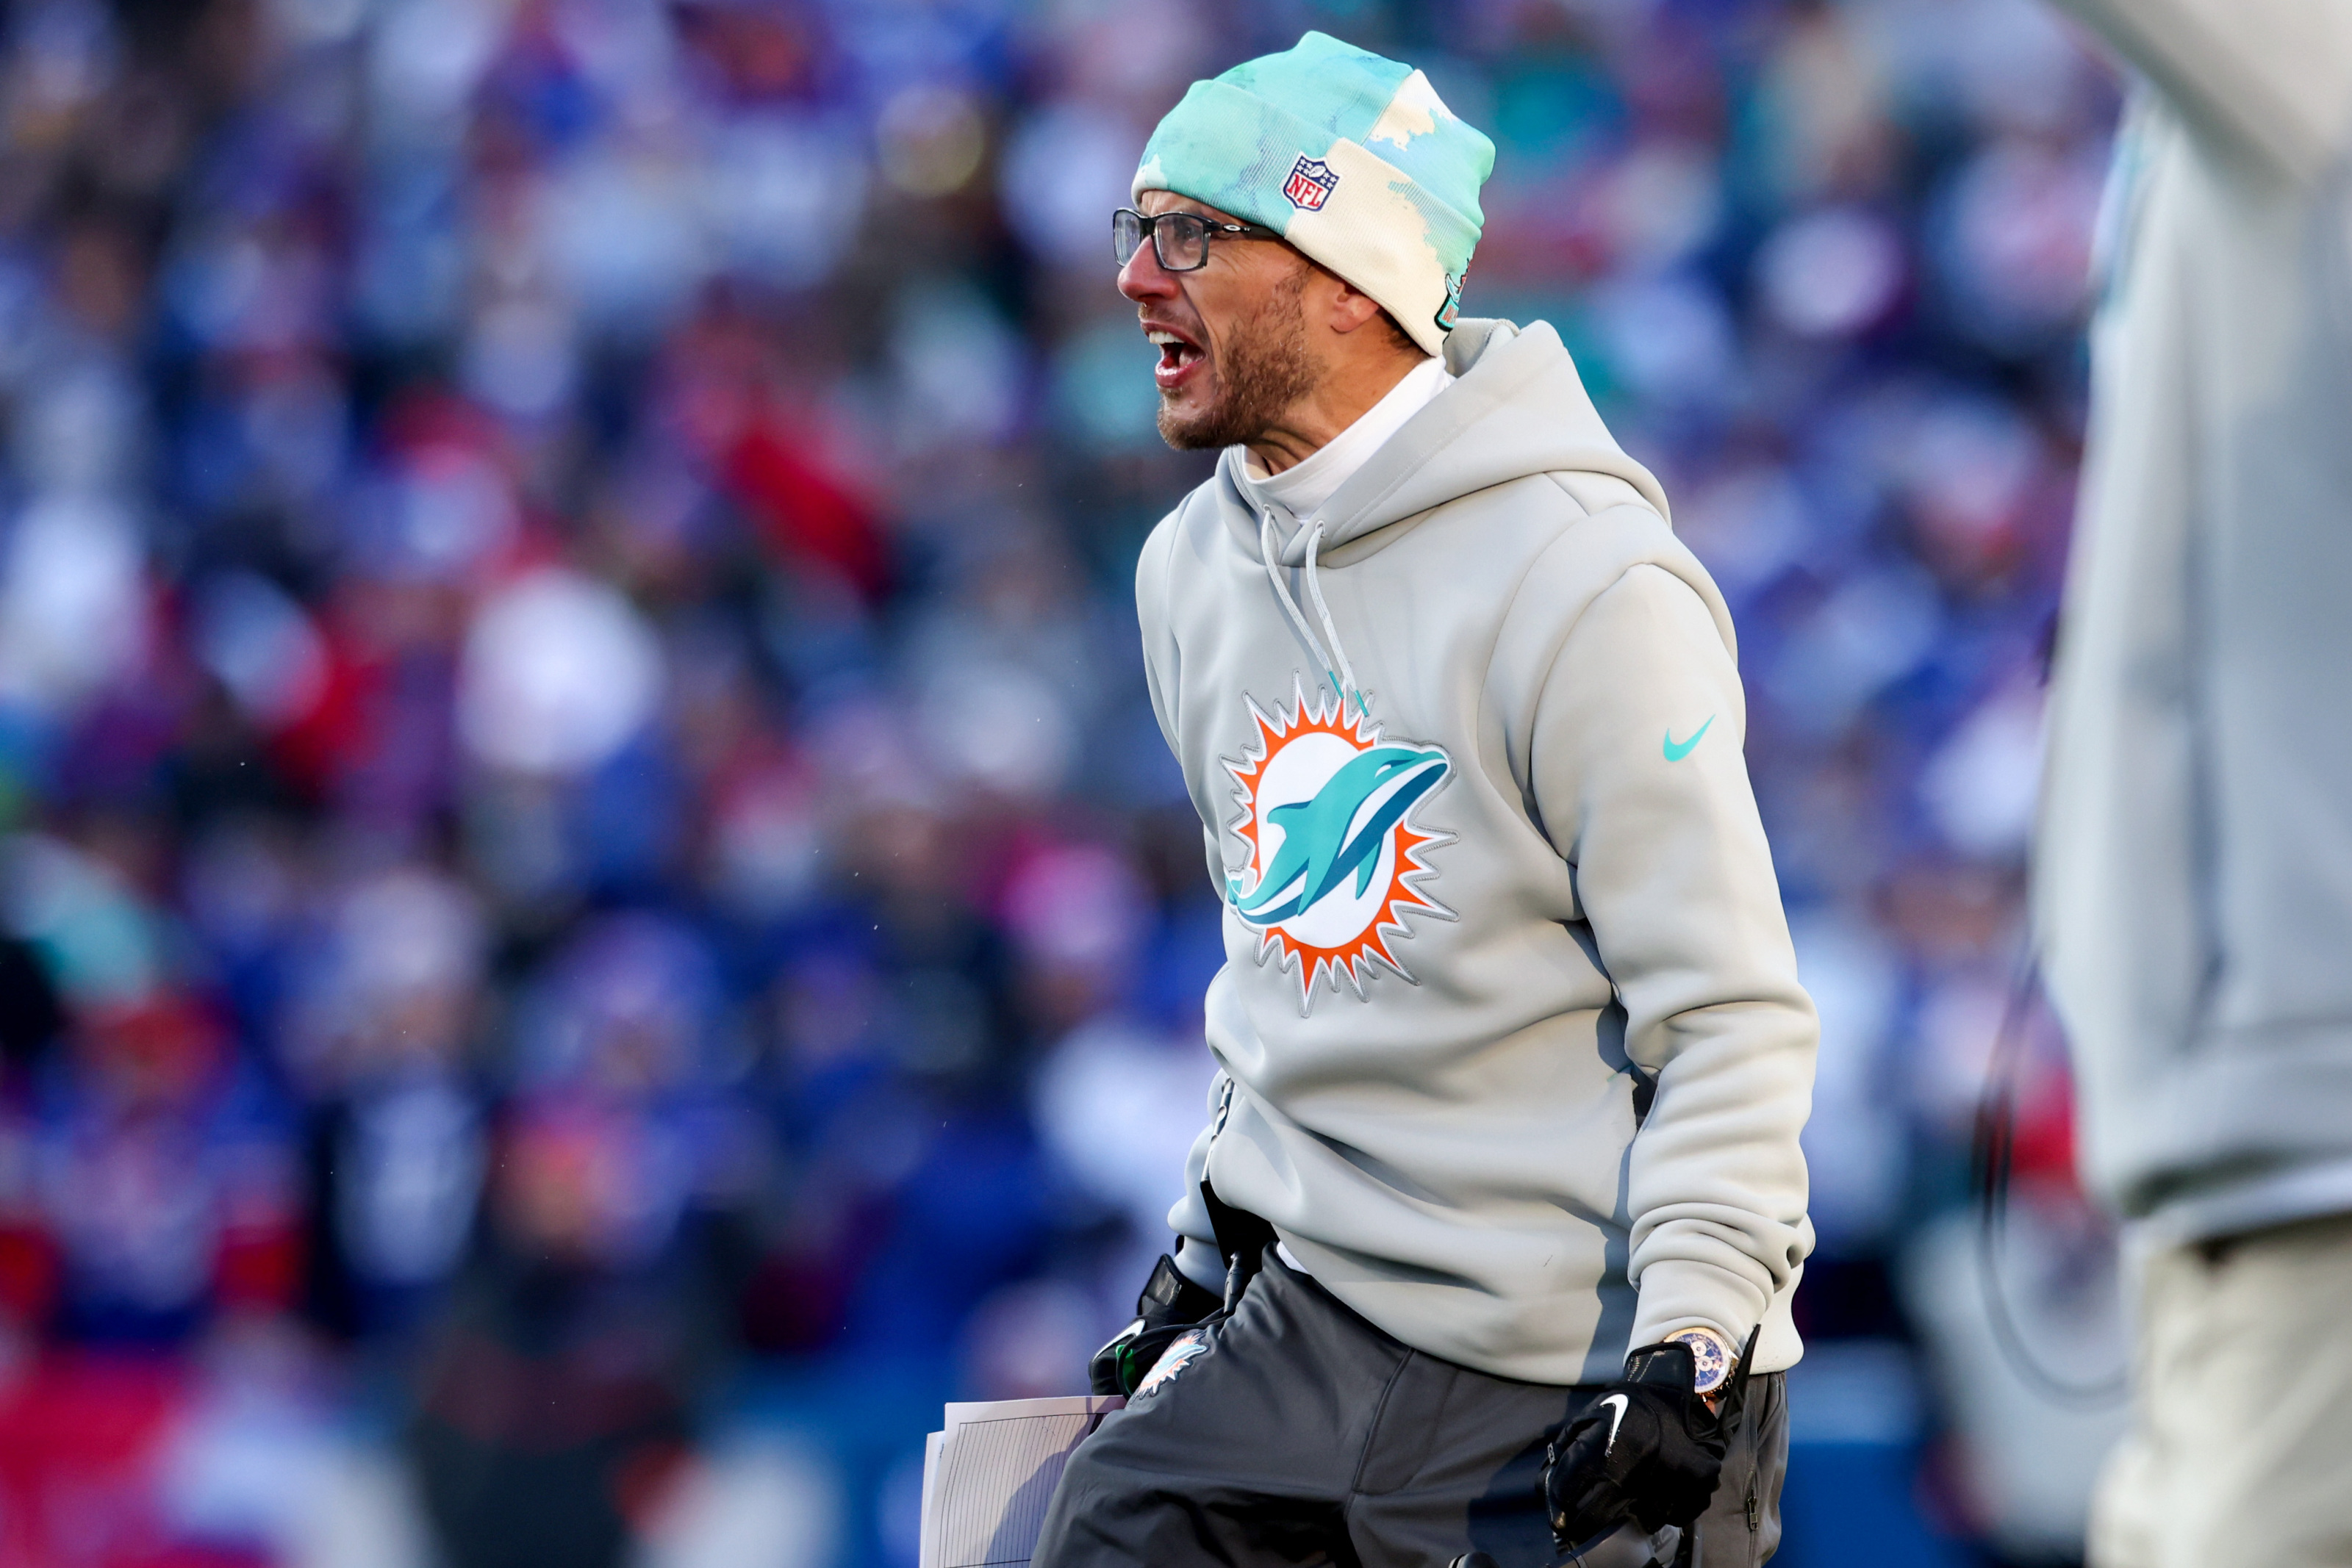 Takeaways from Miami Dolphins' loss to Buffalo Bills in wild-card game